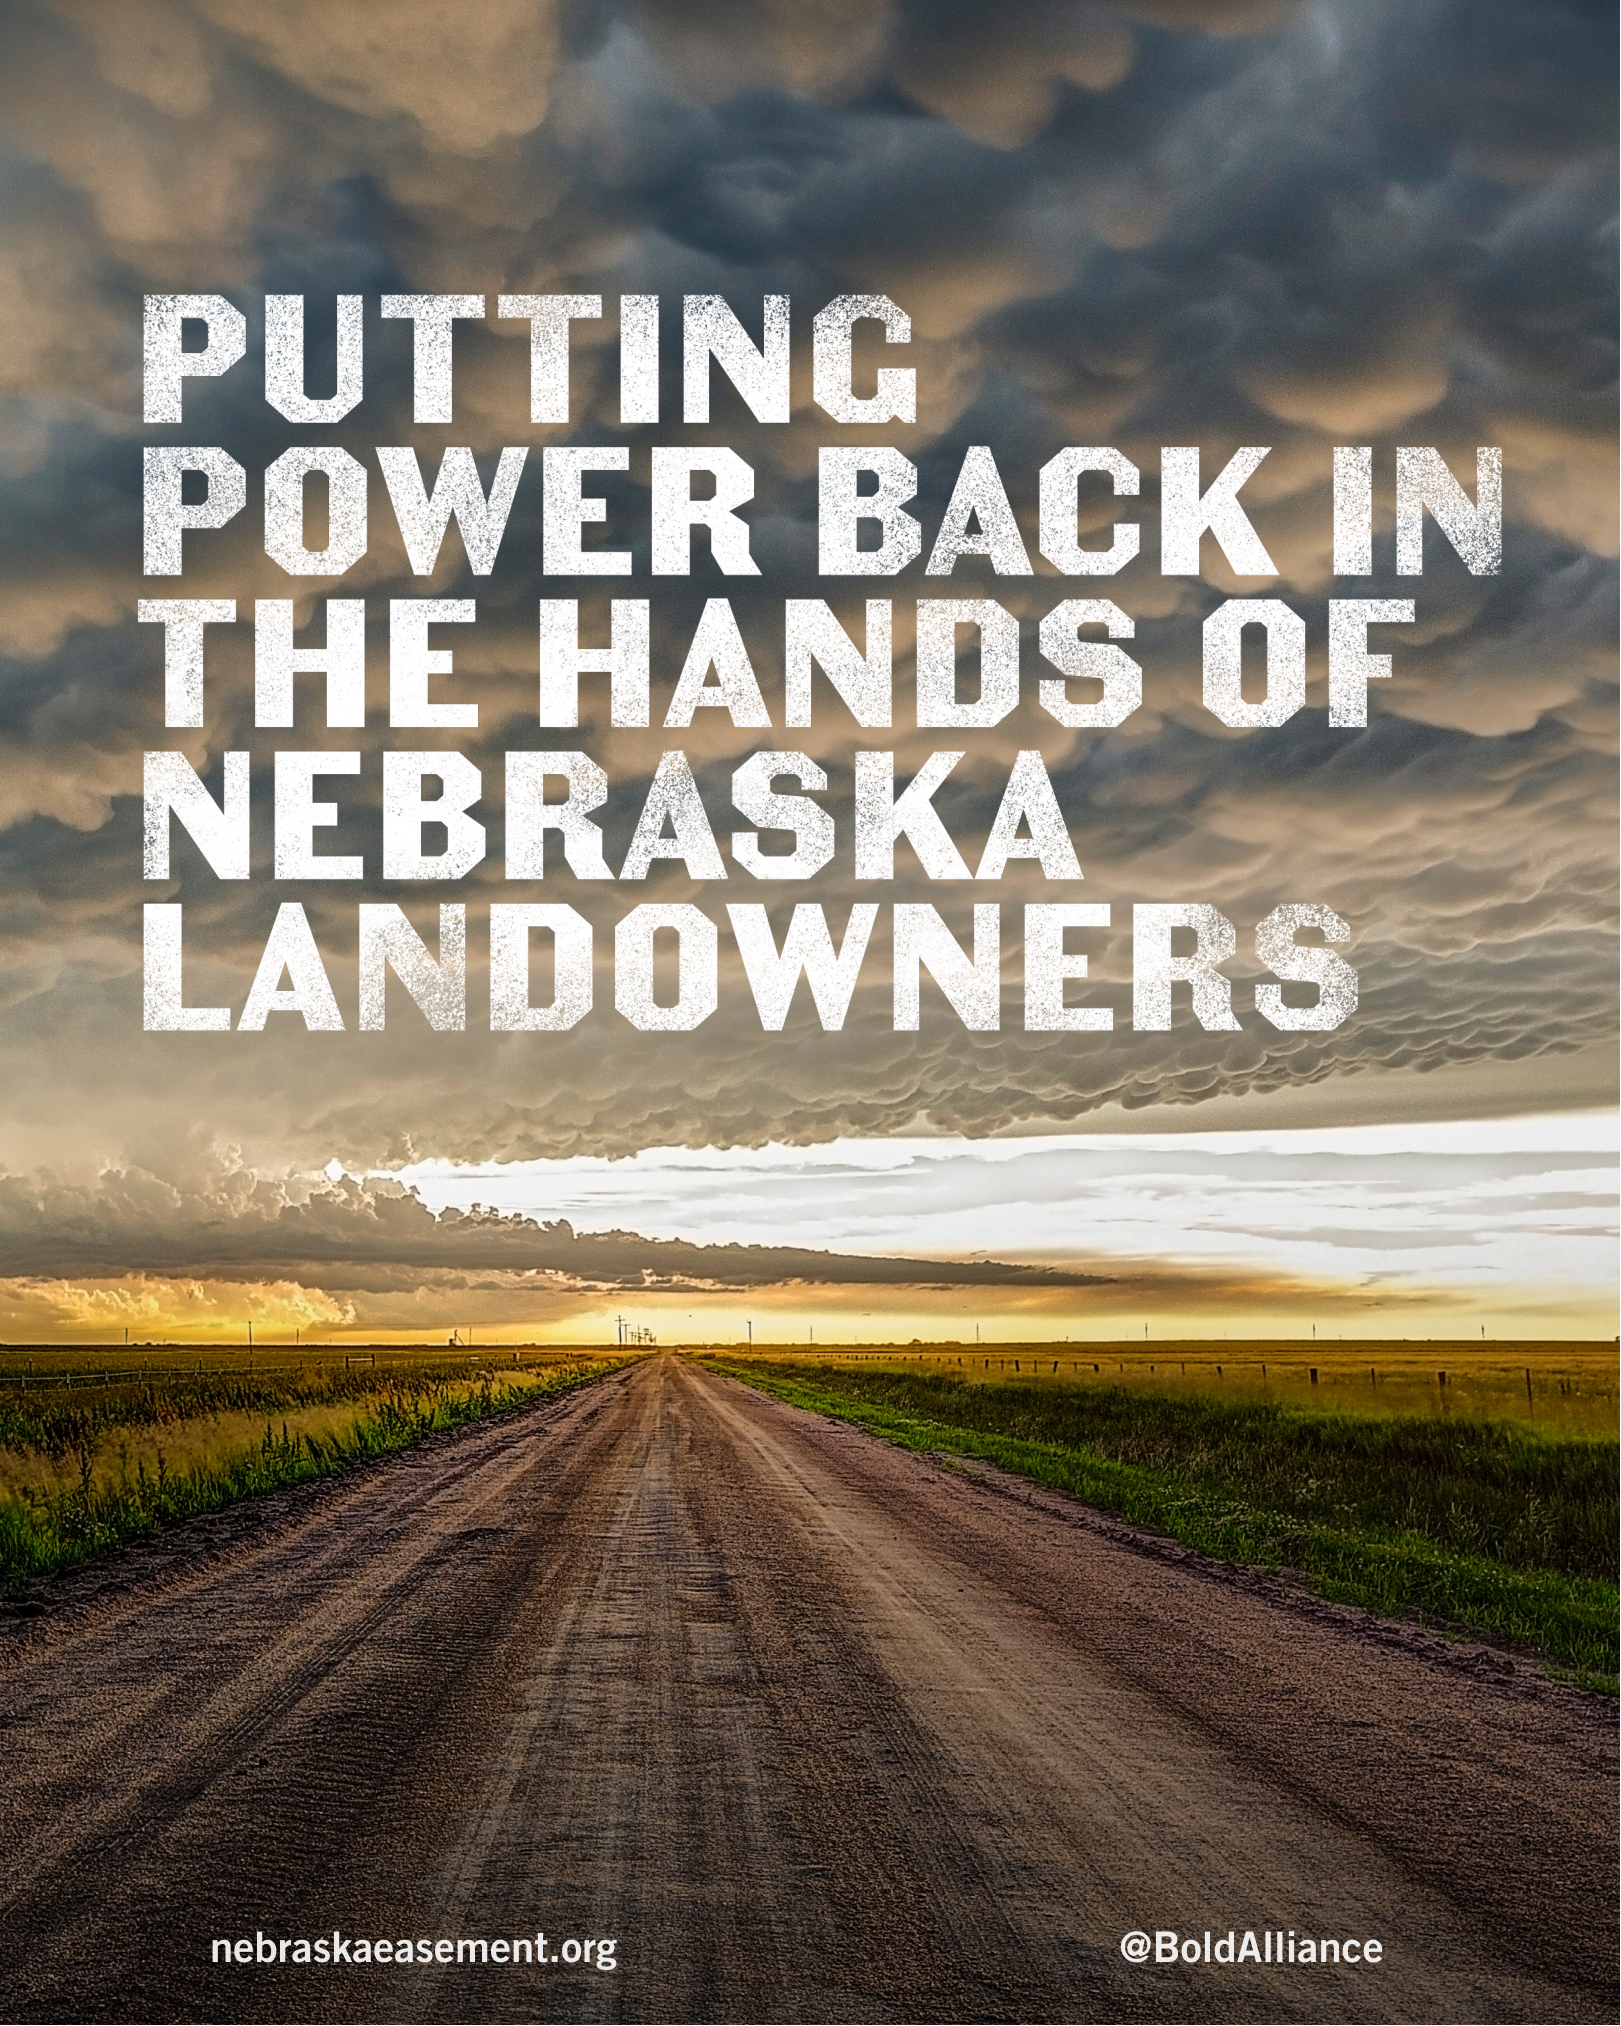 Stormy Nebraska landscape with white text PUTTING THE POWER BACK IN THE HANDS OF NEBRASKA LANDOWNERS.